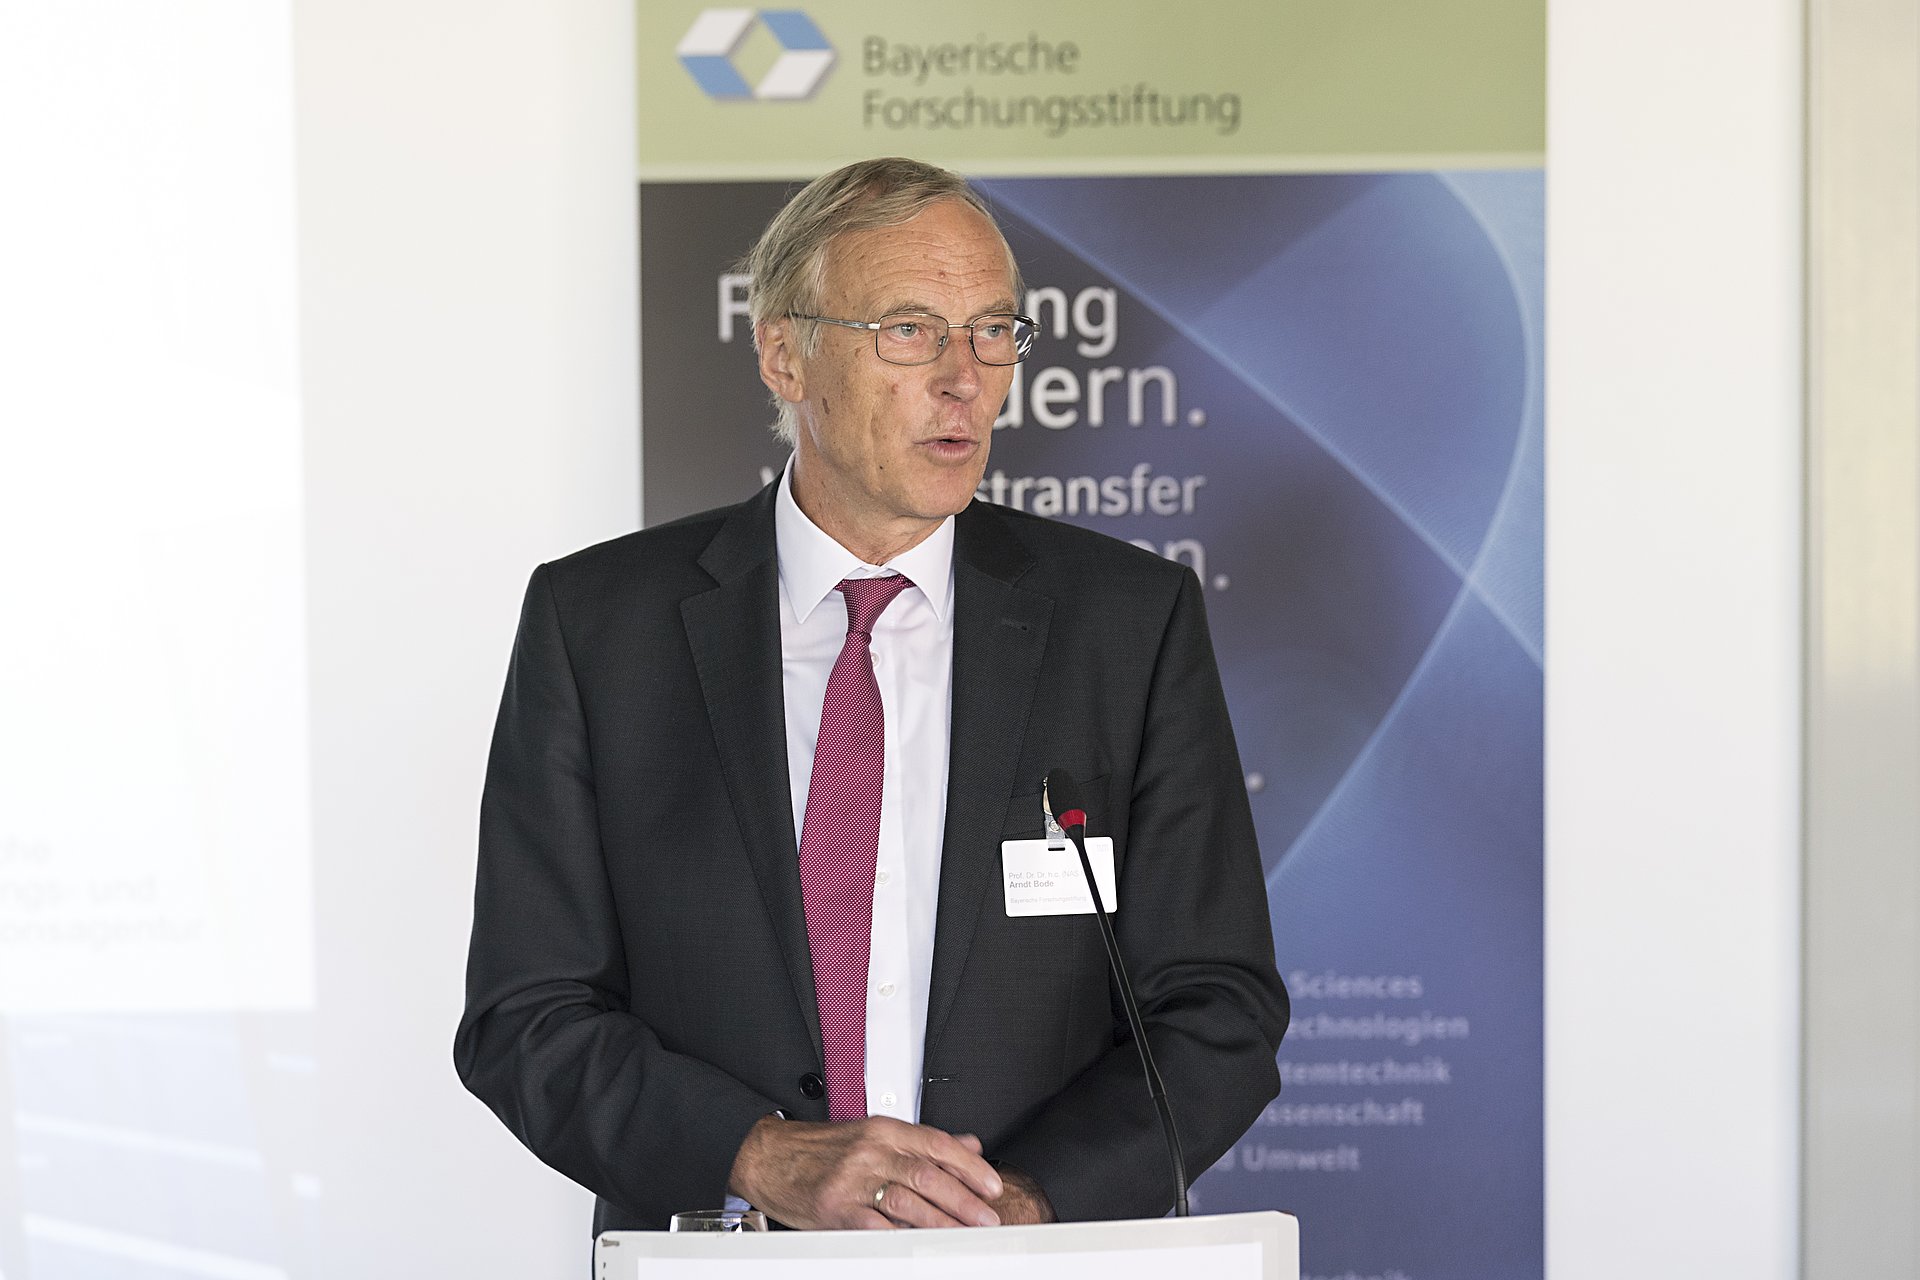 Prof. Arndt Bode, President of the Bavarian Research Foundation, presented the funding notifications to the research groups.